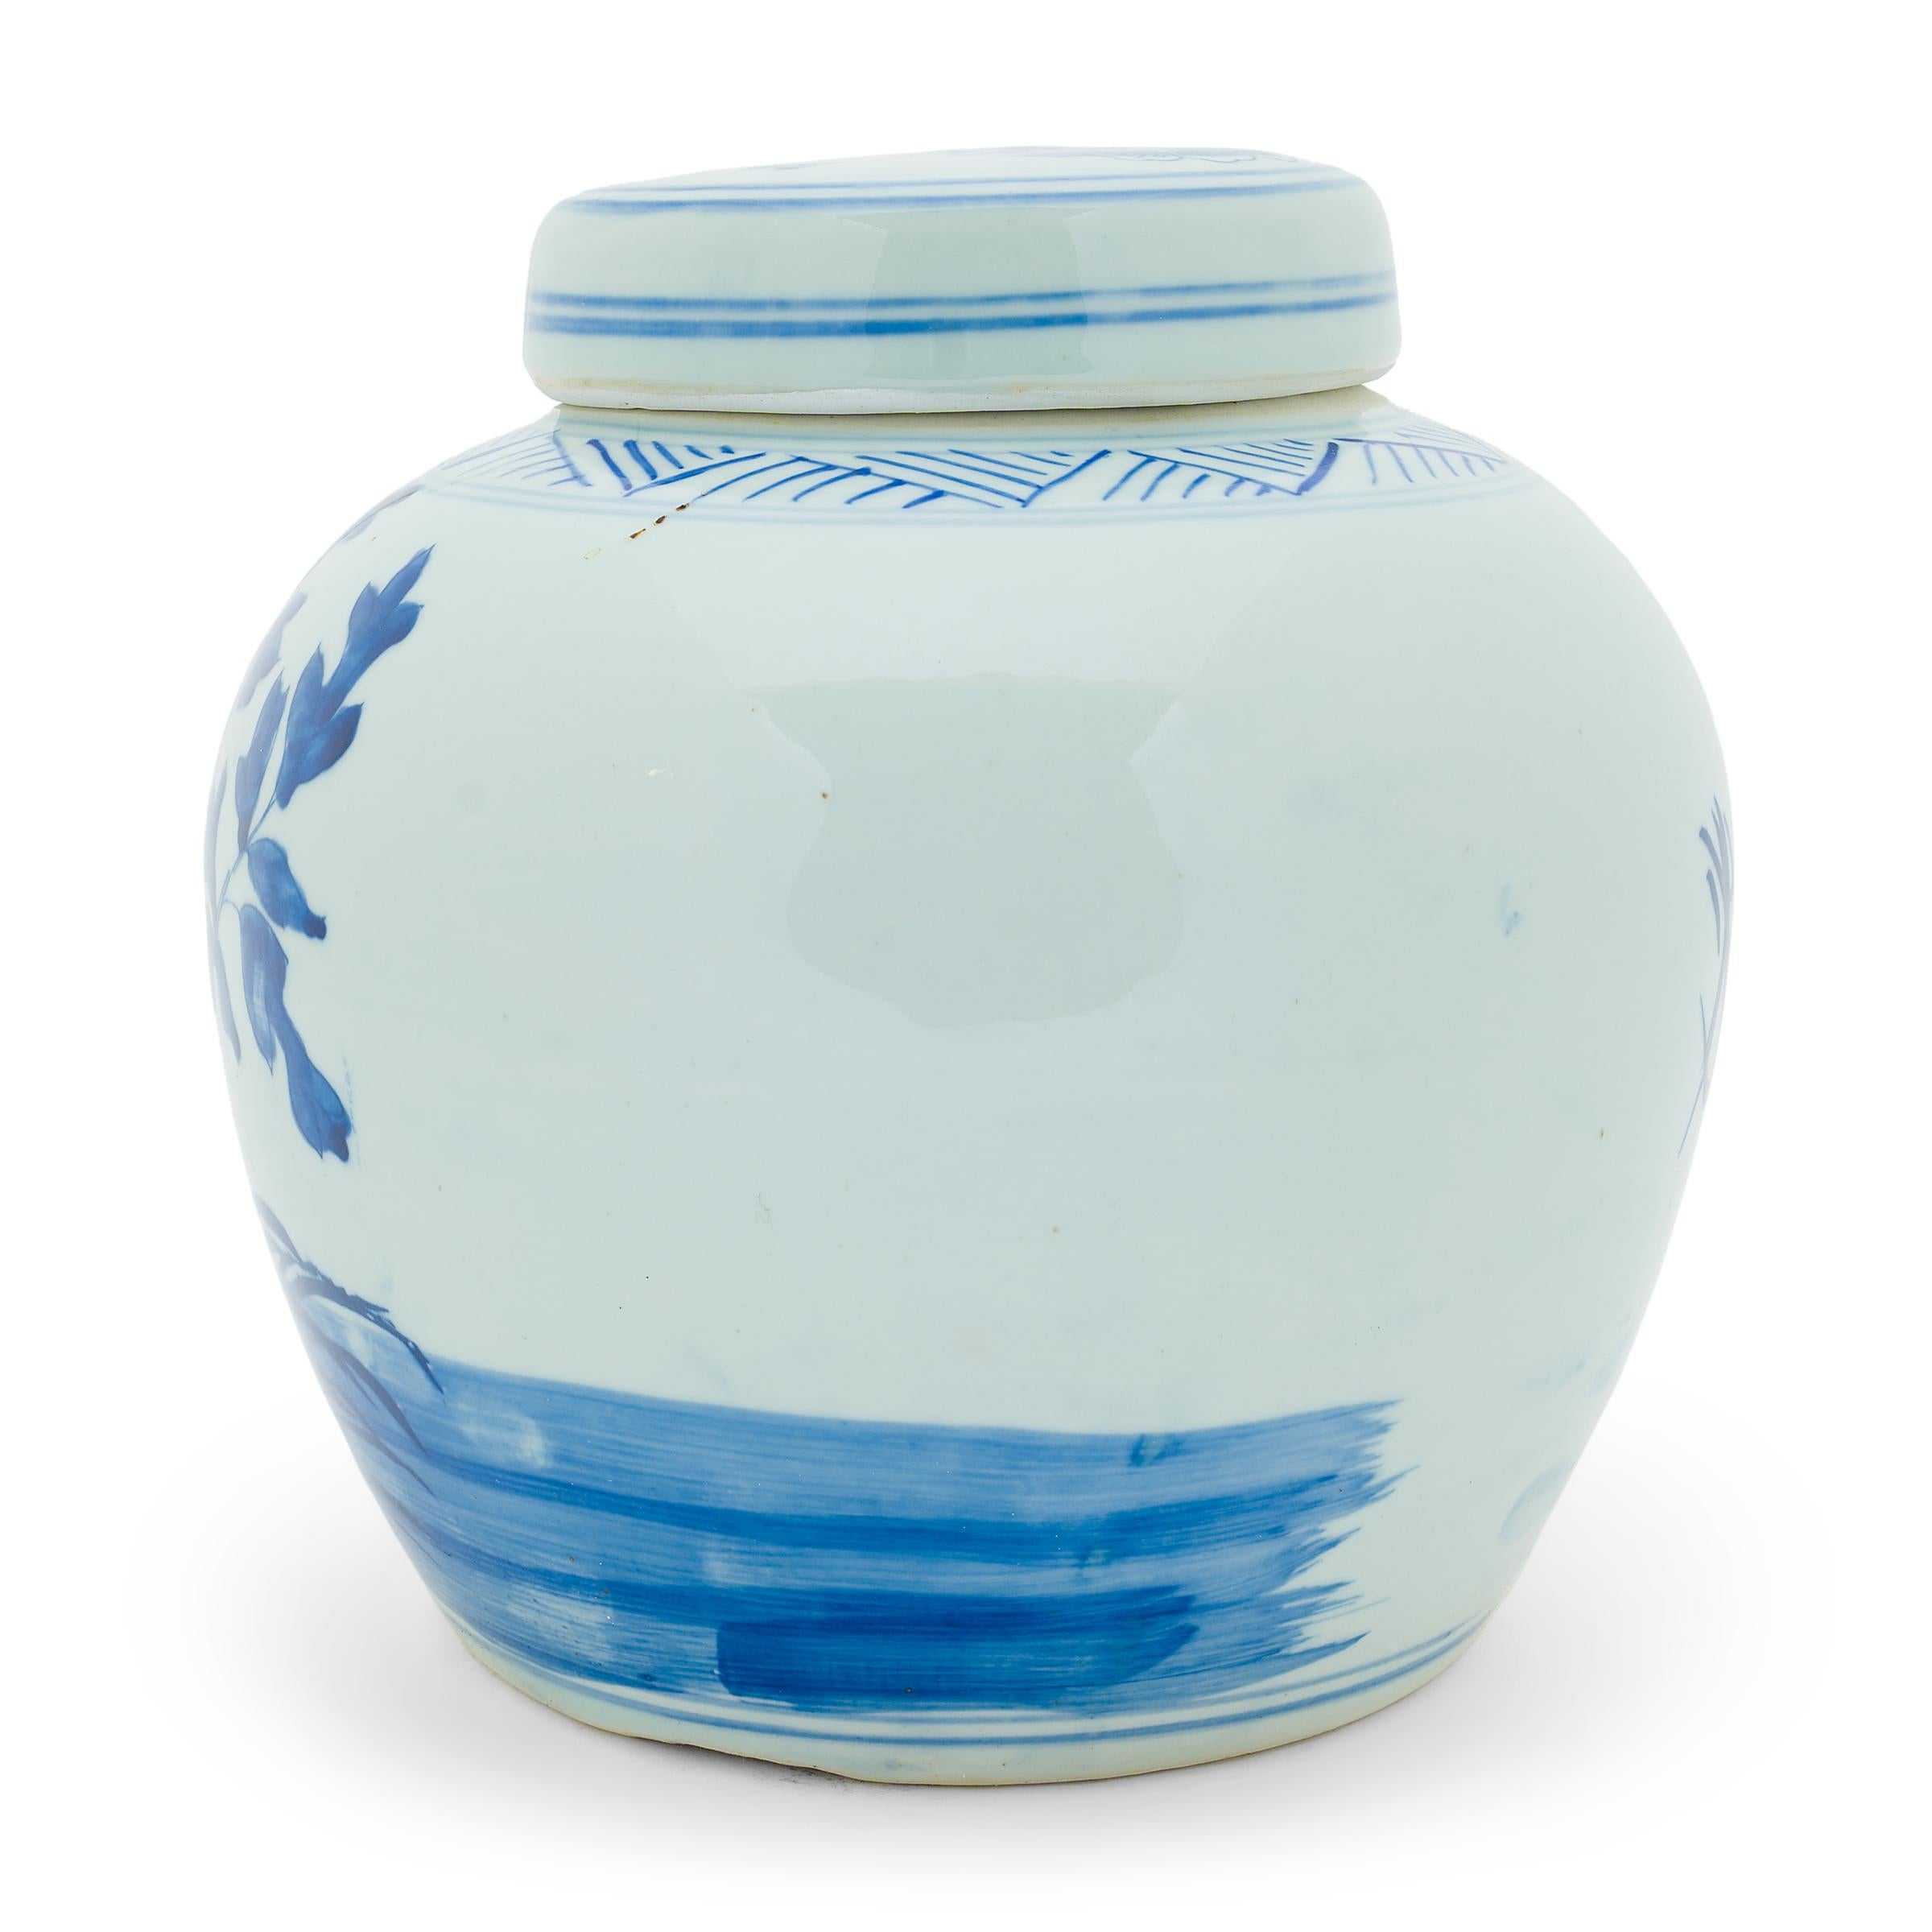 Glazed in the classic blue-and-white manner, this rounded jar is a celebration of spring. Framed by a triangle-work border, the jar is festooned with peony blossoms, emblems of spring and symbols of love, affection, and feminine beauty. The dark